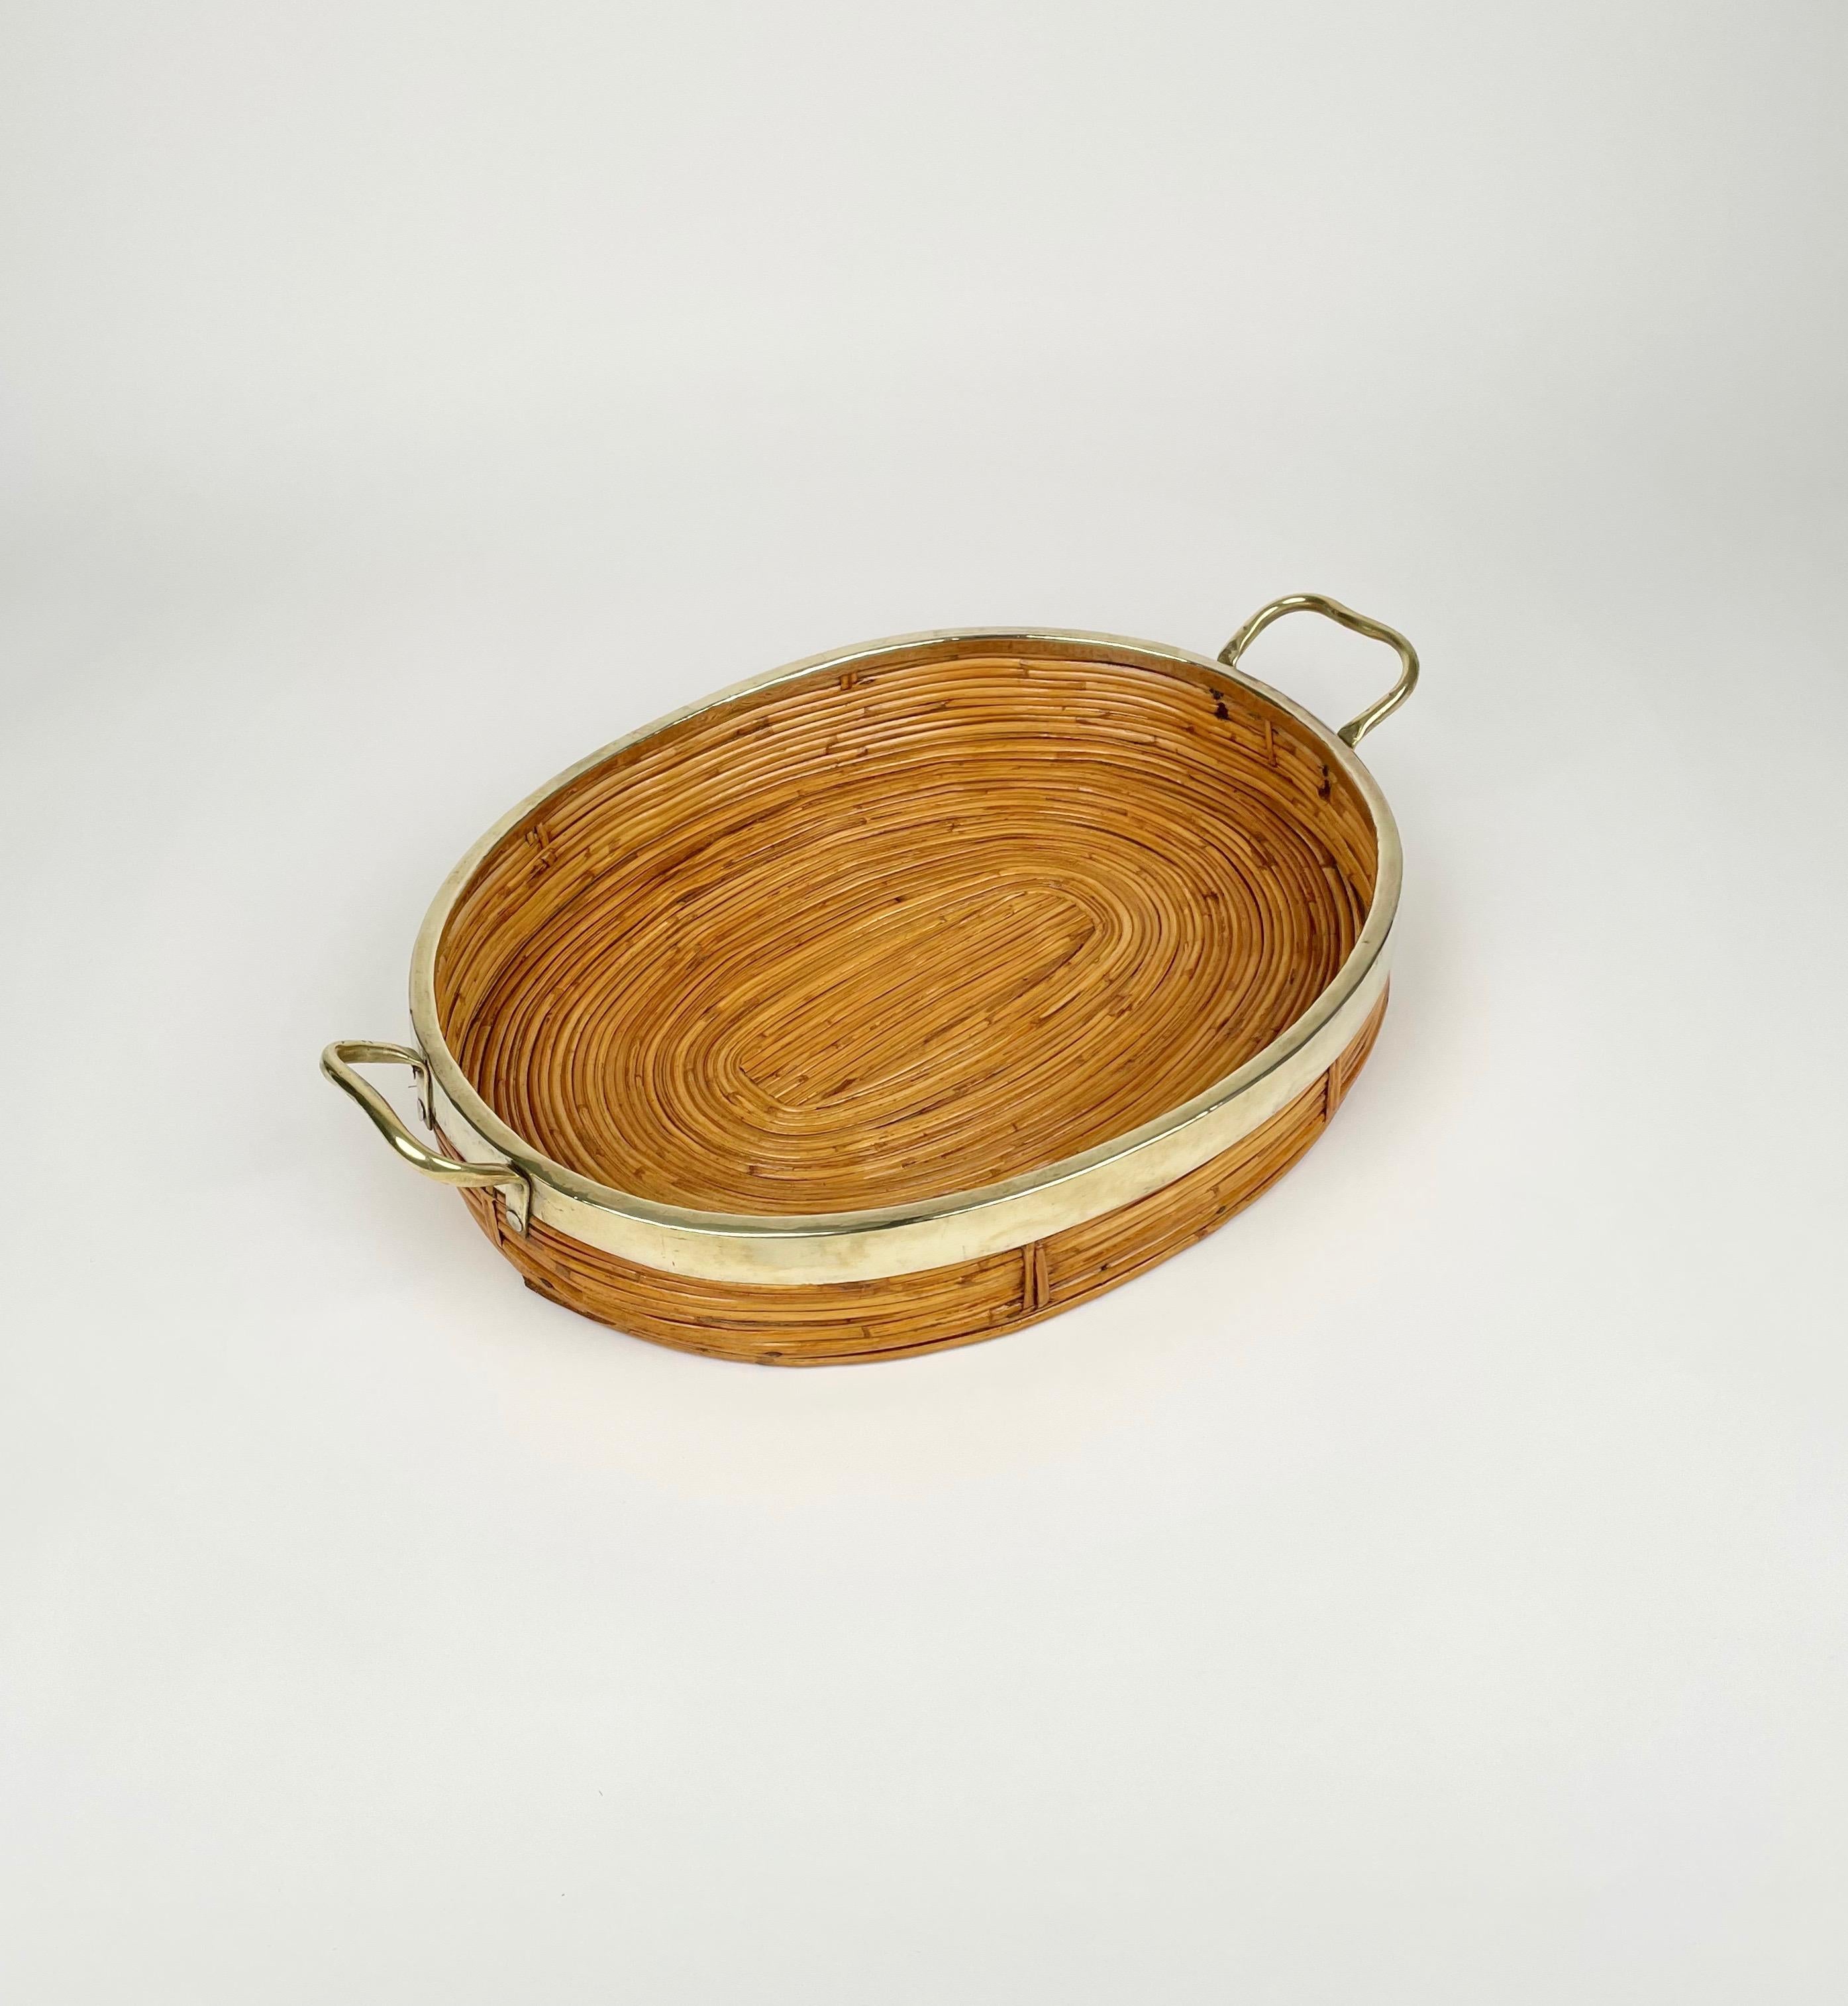 Late 20th Century Oval Serving Tray Bamboo, Rattan & Brass, Italy 1970s For Sale